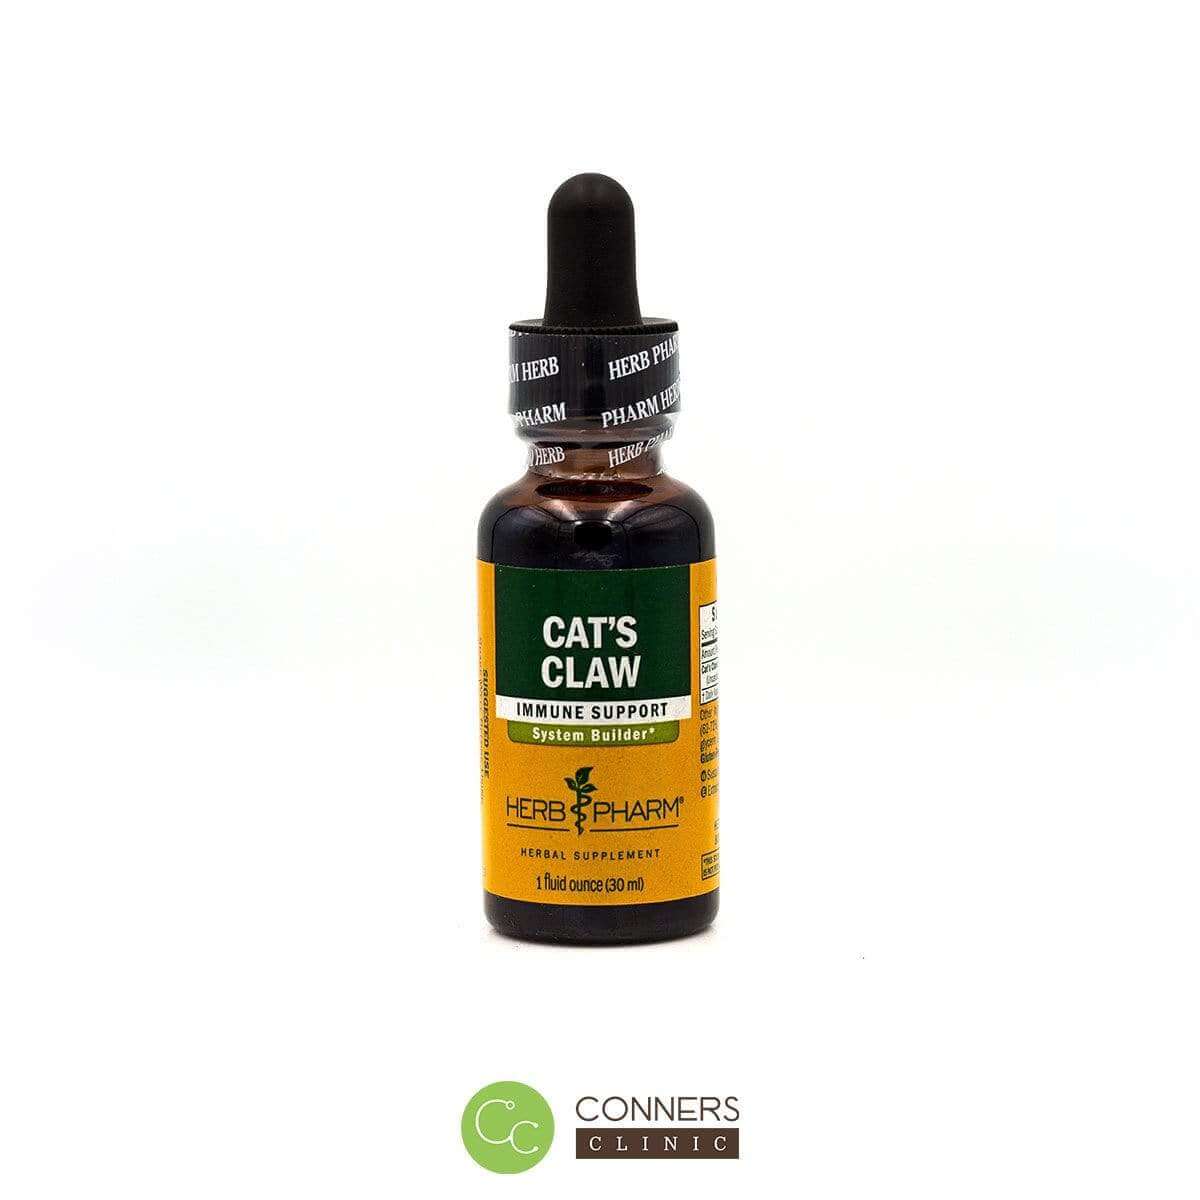 Cat's Claw- 1 fluid oz Herb Pharm Supplement - Conners Clinic